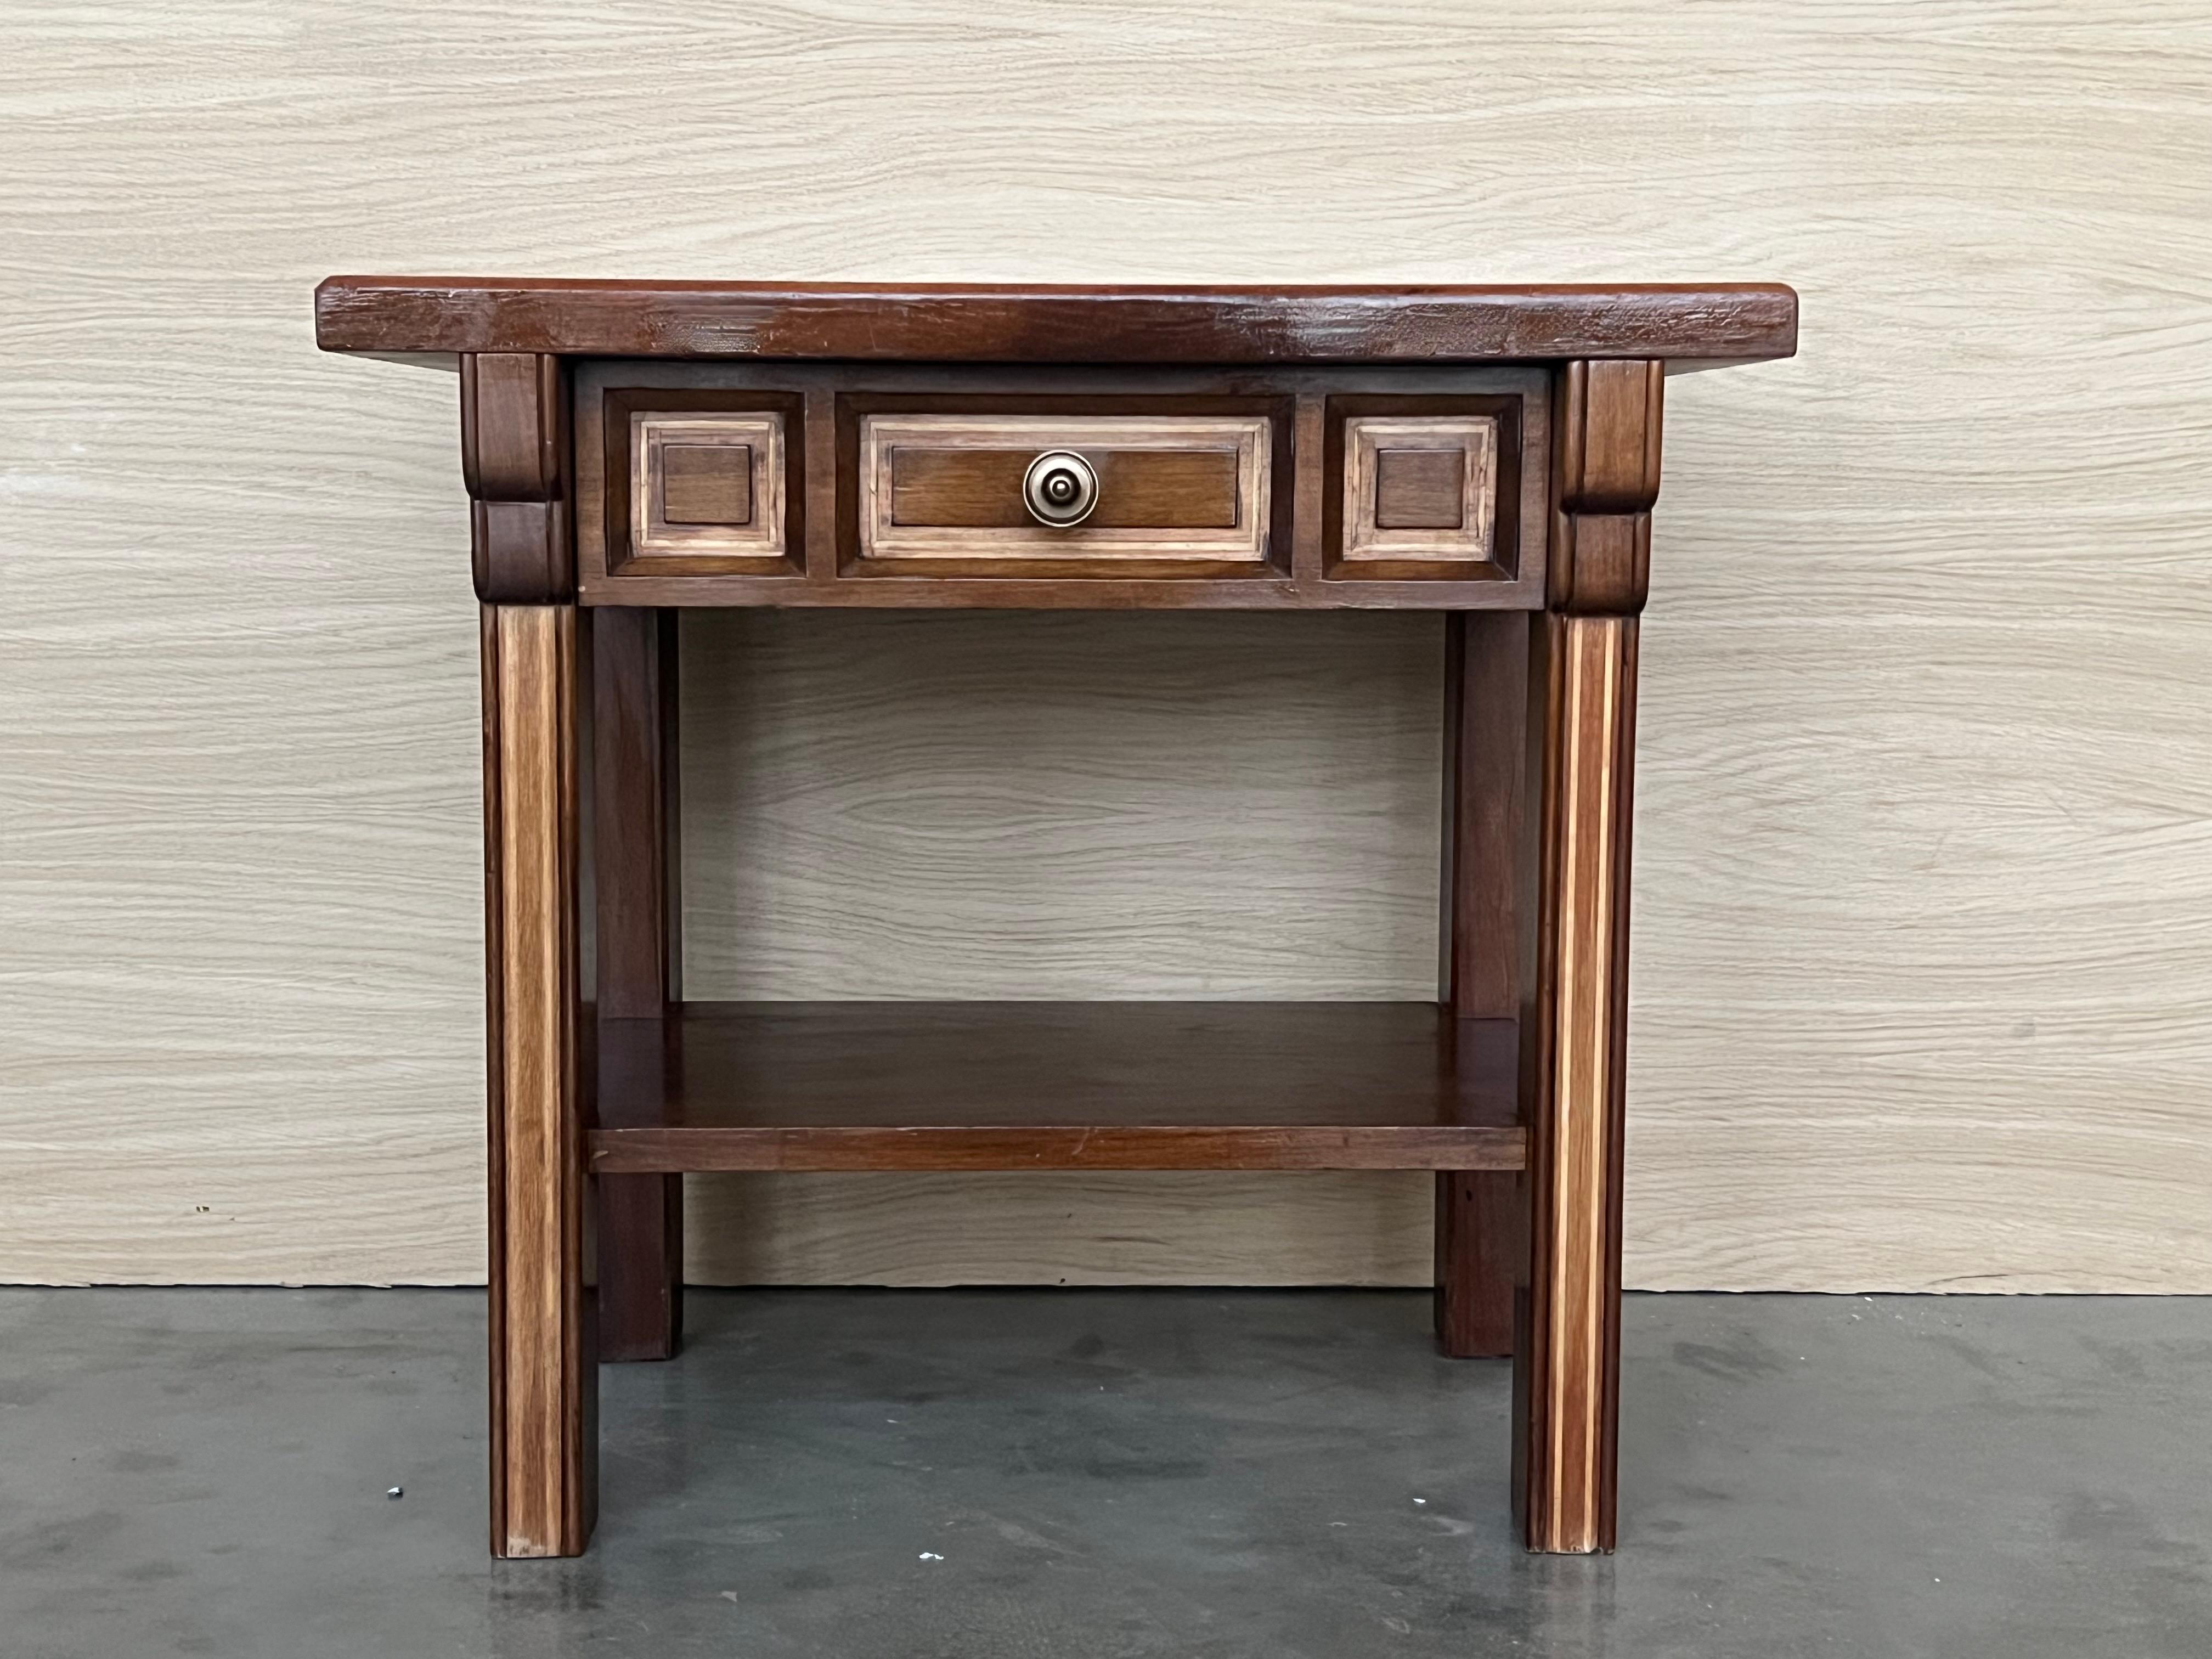 20th century Pair of Spanish nightstands with one drawer and low shelve. The table has beautiful carved drawers with original color contrast. Beautiful tables that you can use like a nightstands or side tables, end tables or table lamp, desk or